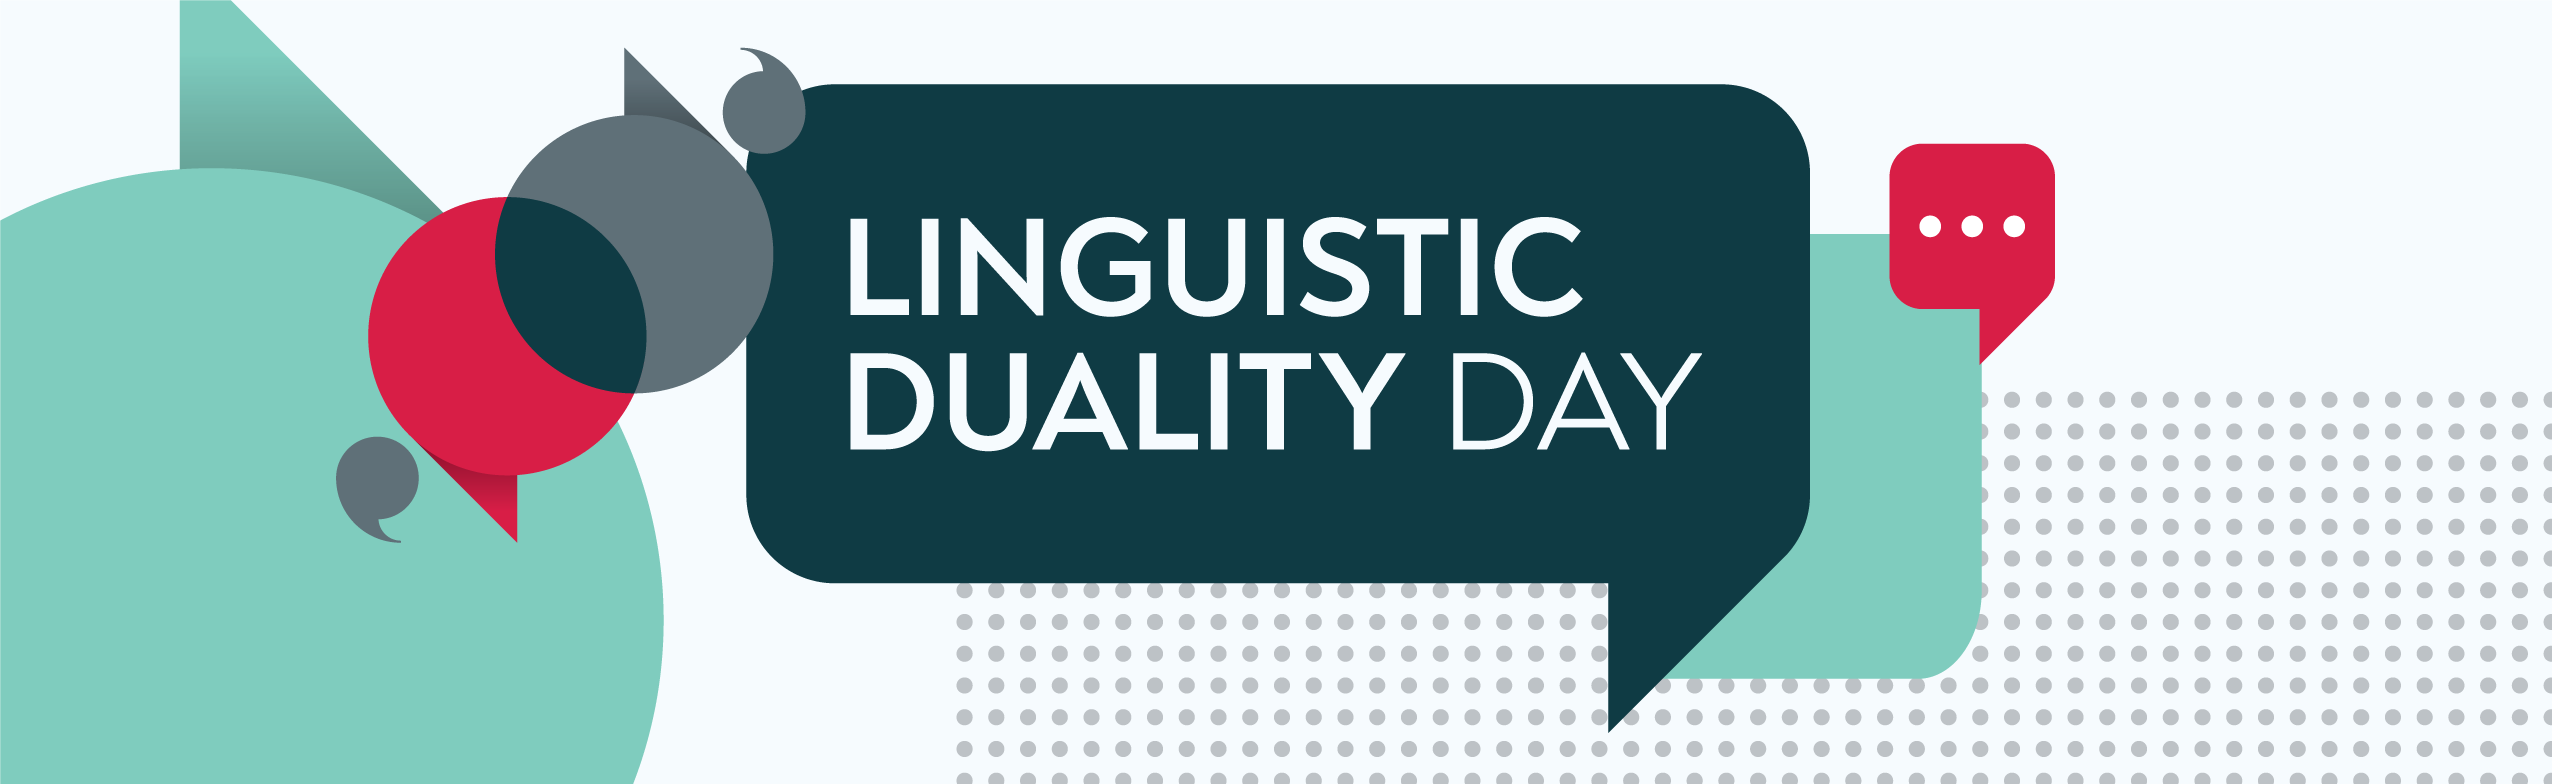 Linguistic Duality Day banner